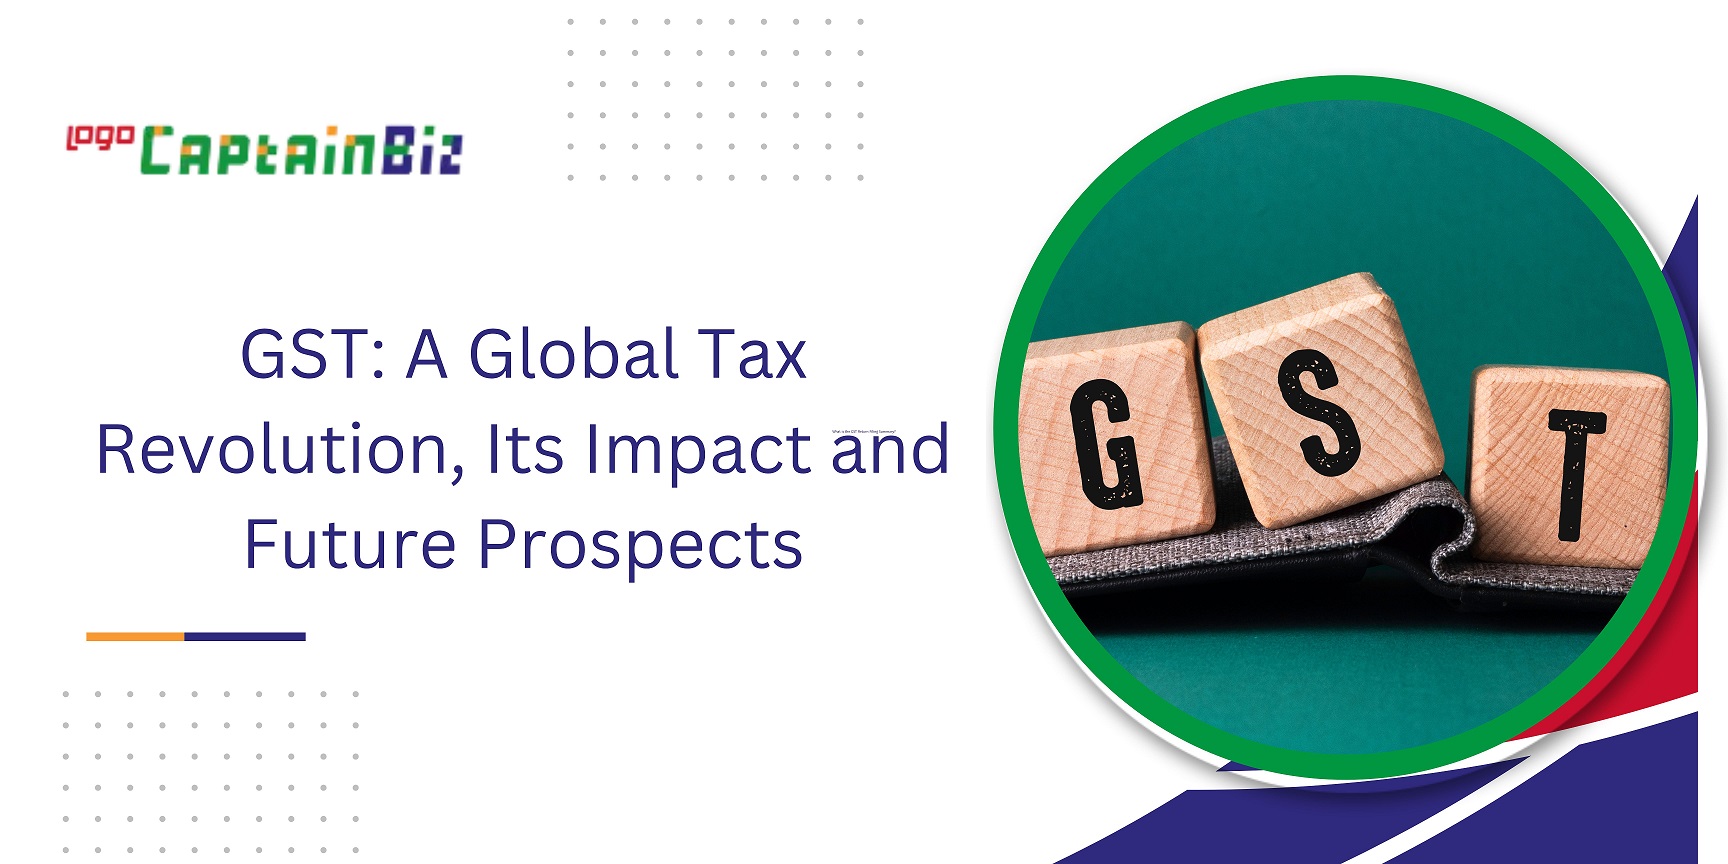 CaptainBiz: gst a global tax revolution its impact and future prospects